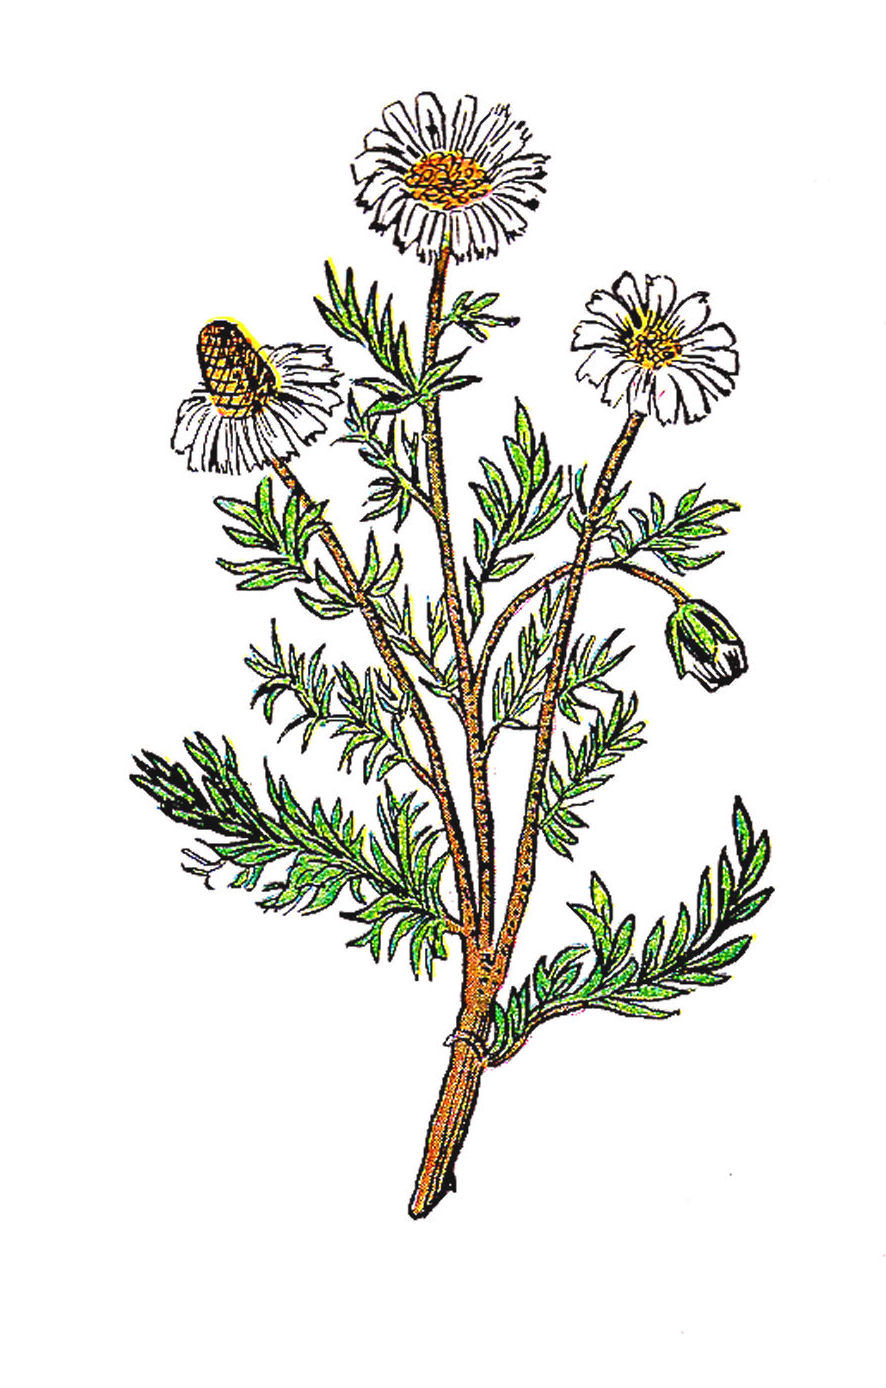 Free Flower Graphic: Vintage Illustration of Chamomile Herb Plant with  Flowers and Leaves